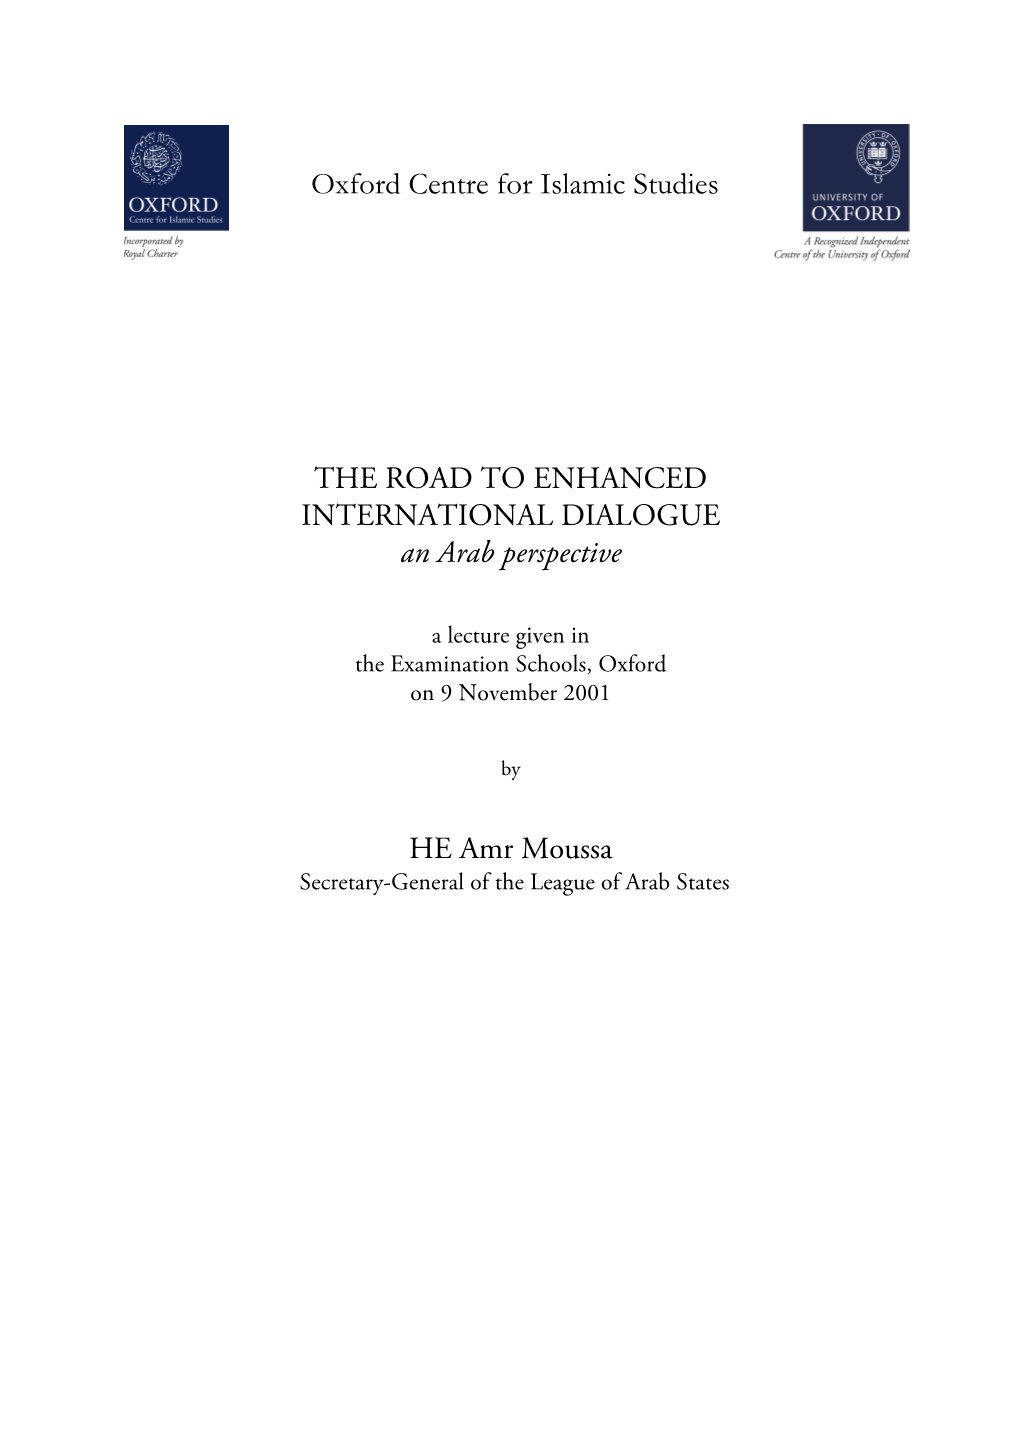 THE ROAD to ENHANCED INTERNATIONAL DIALOGUE an Arab Perspective HE Amr Moussa Oxford Centre for Islamic Studies